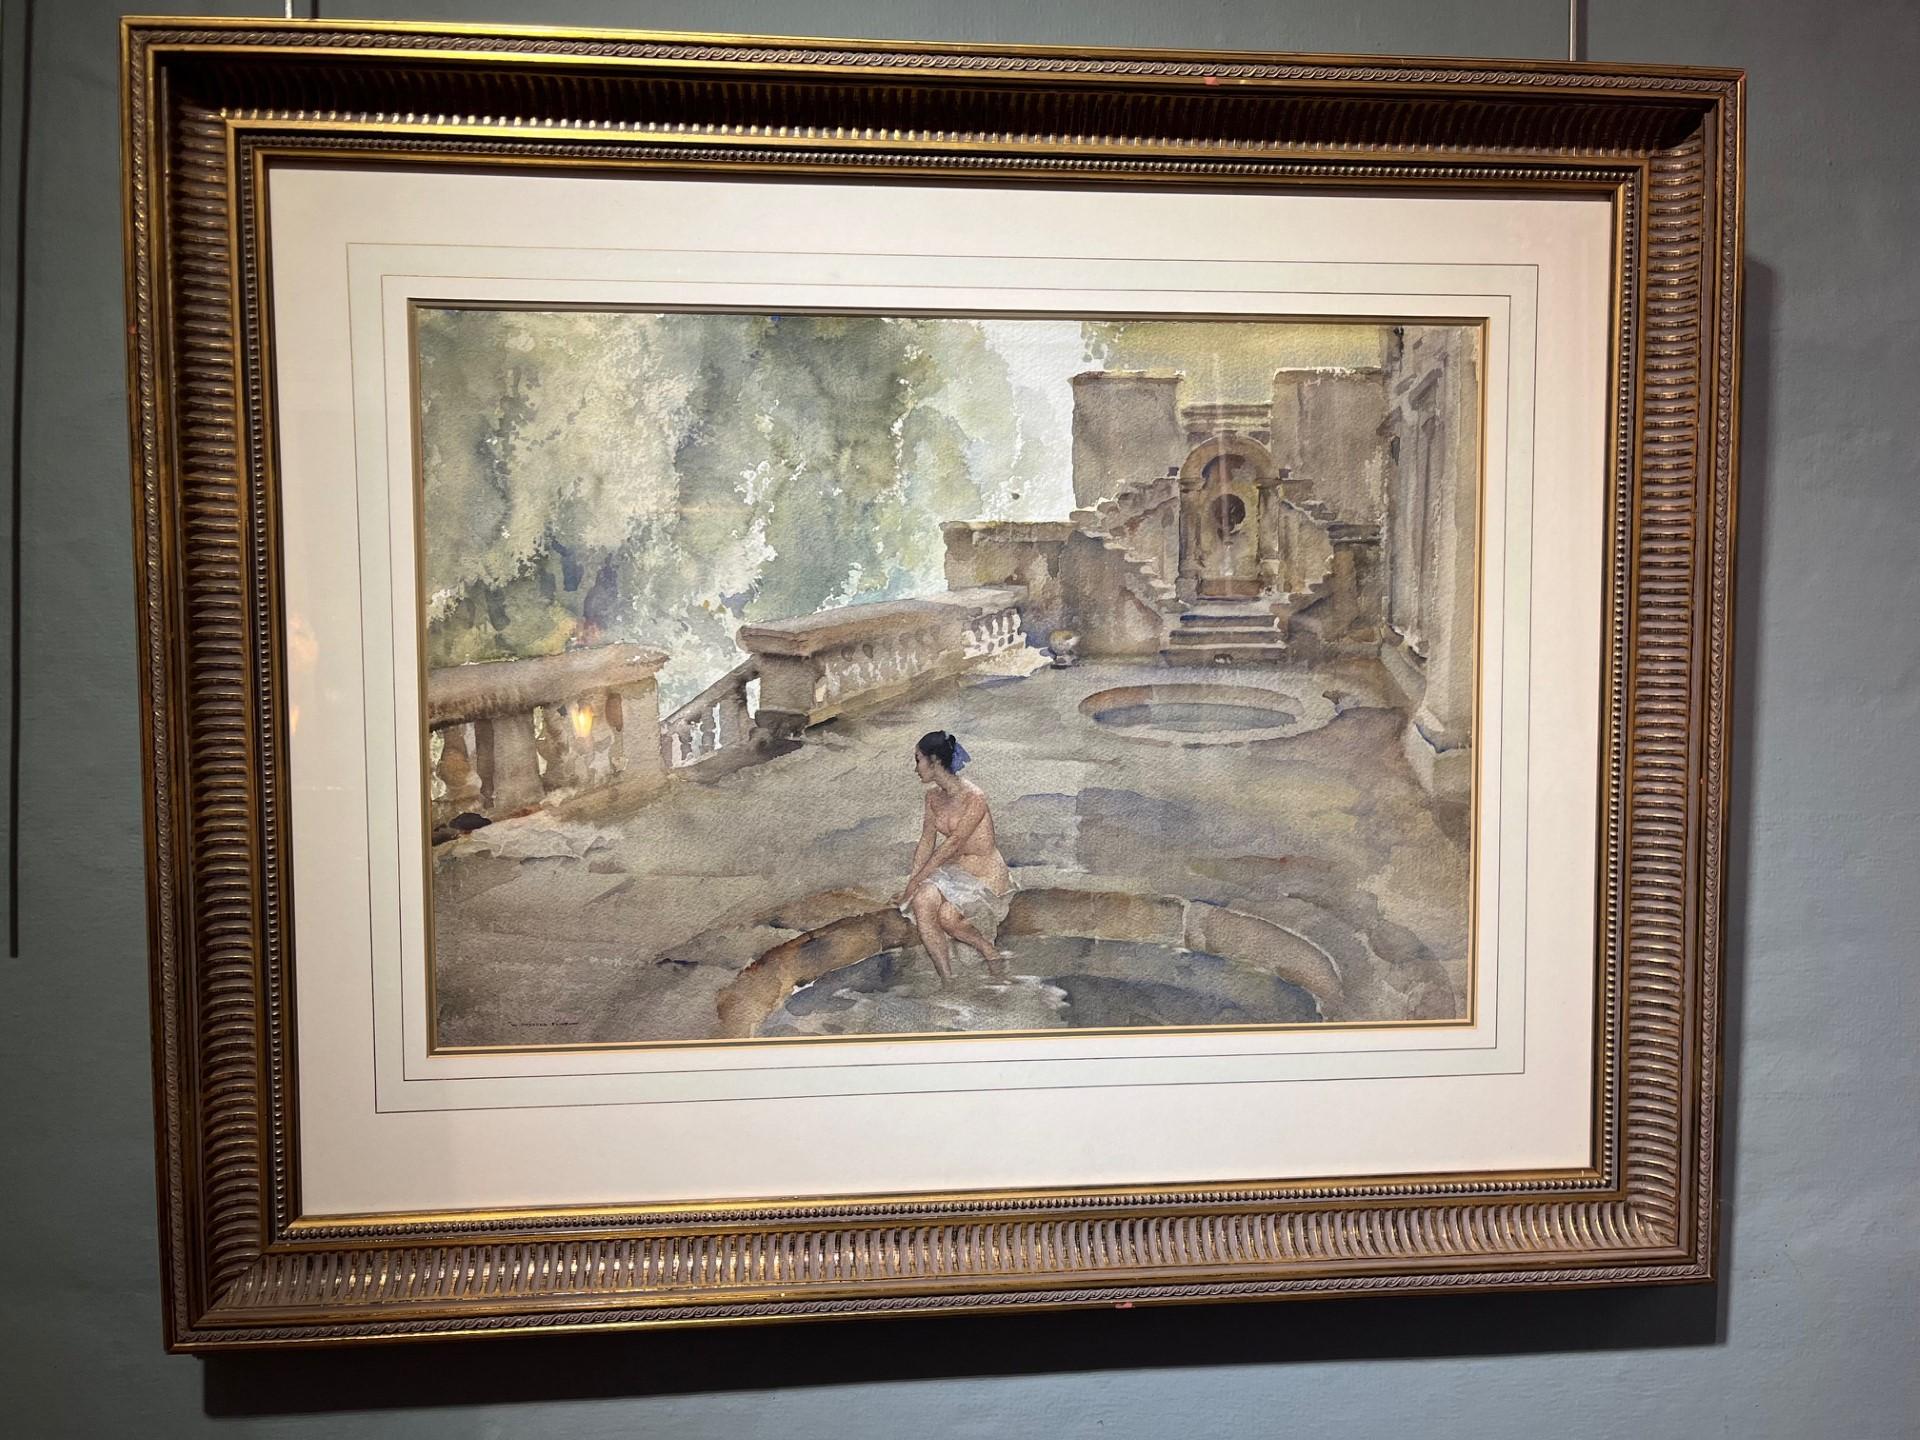 Cecilia Lake Orta - Naked model in beautiful Villa Italy original watercolour - Post-Impressionist Art by Sir William Russell Flint RA ROI 